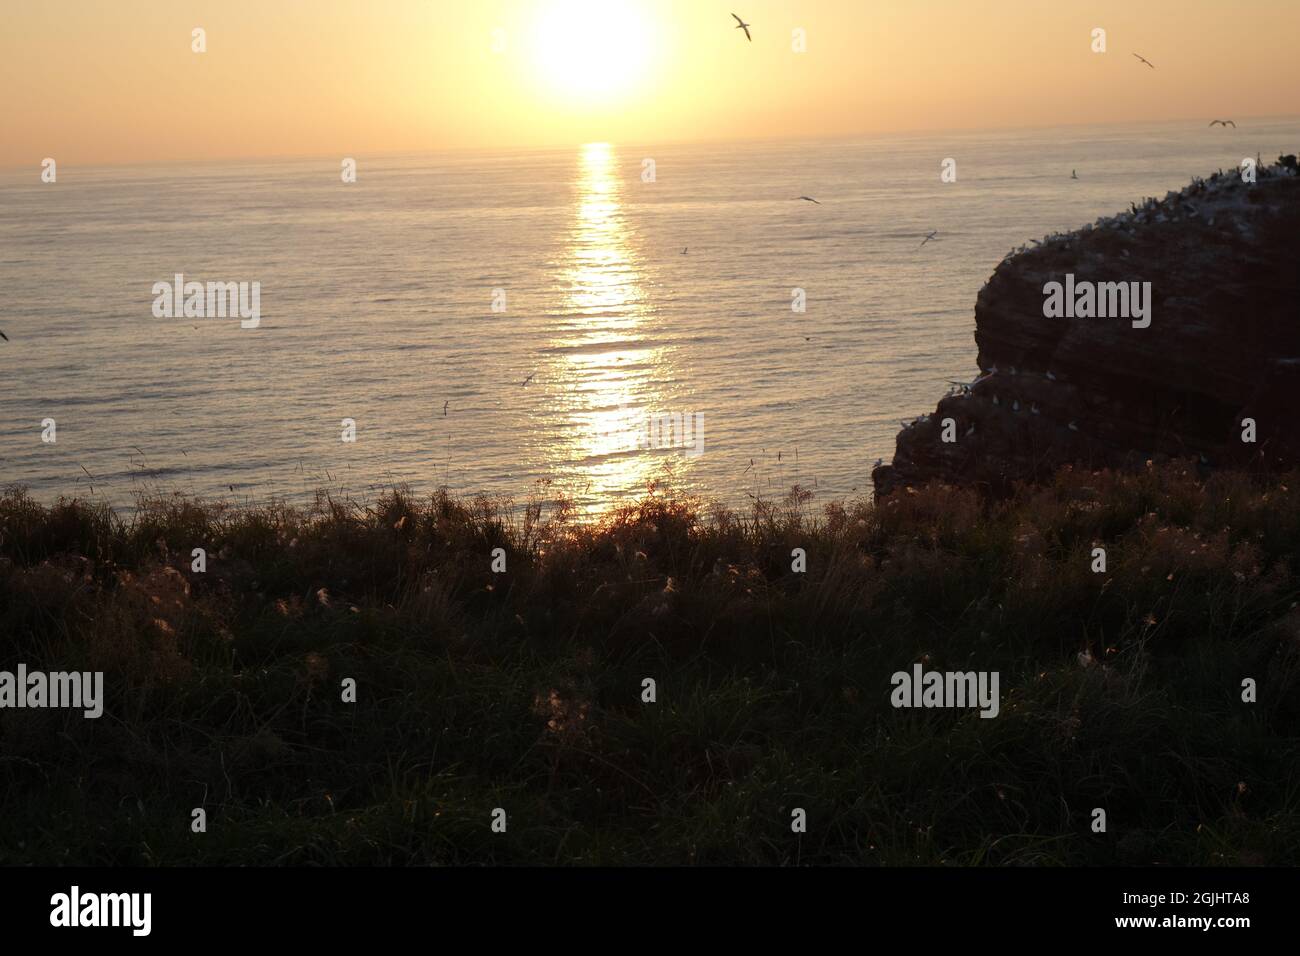 Sunset by the sea with northern gannets on a cliff and in the air Stock Photo